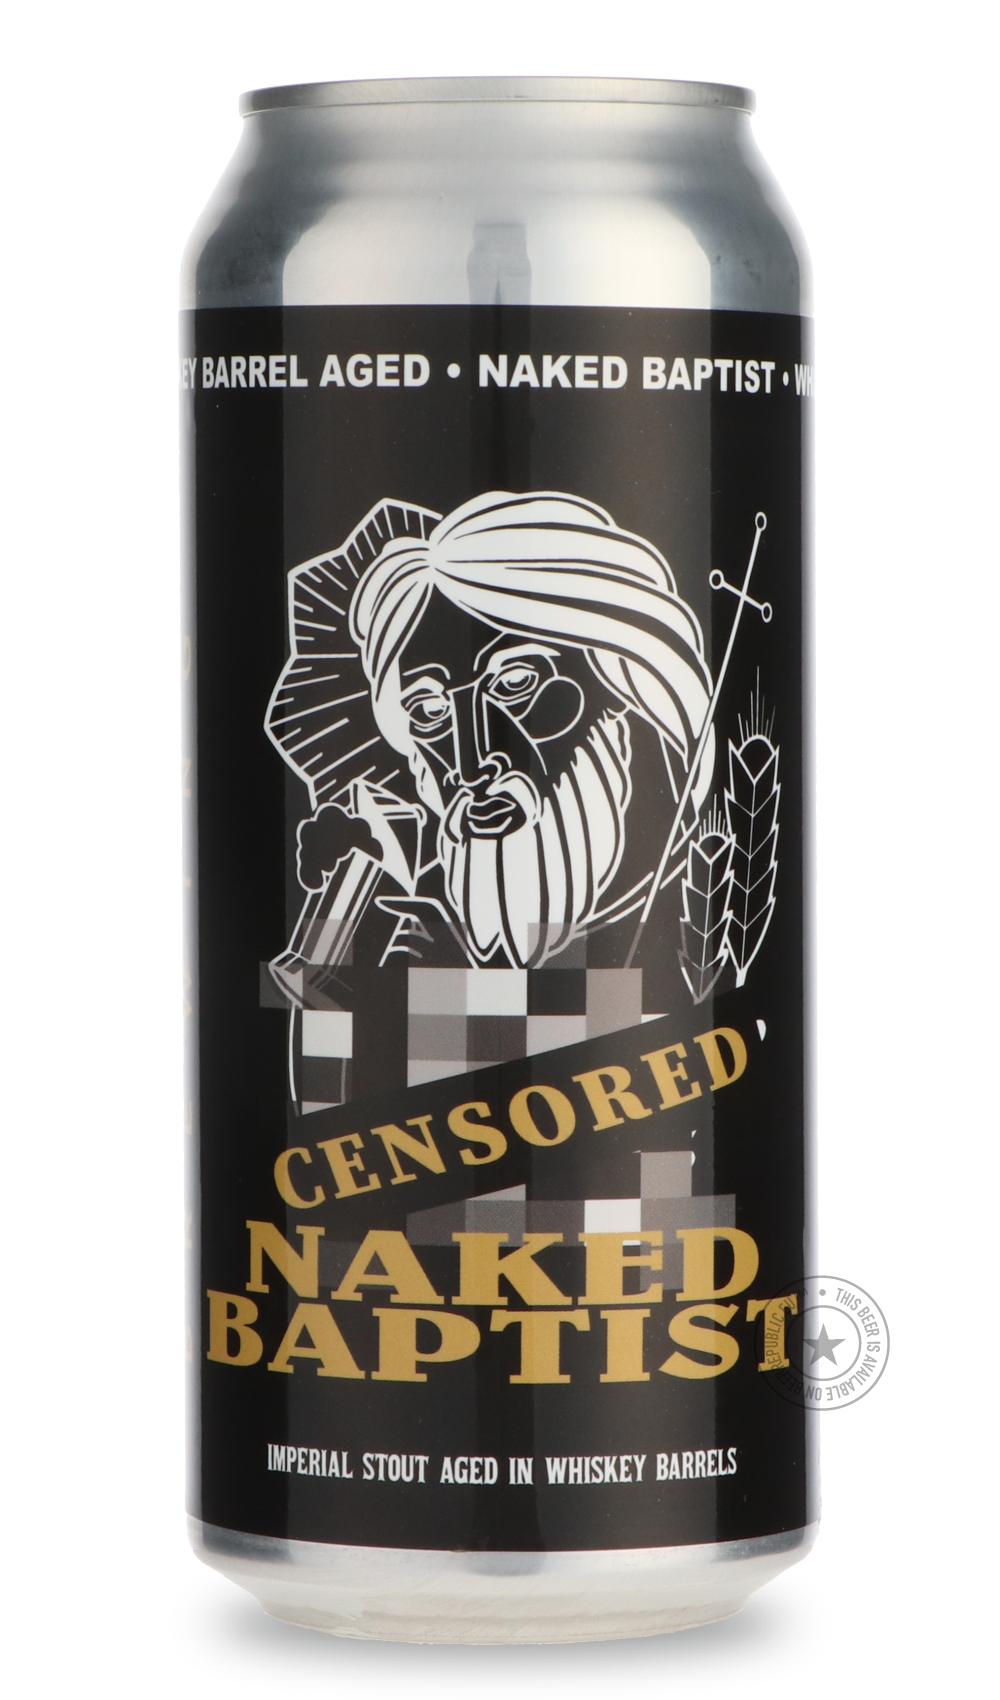 -Epic- Naked Big Bad Baptist-Stout & Porter- Only @ Beer Republic - The best online beer store for American & Canadian craft beer - Buy beer online from the USA and Canada - Bier online kopen - Amerikaans bier kopen - Craft beer store - Craft beer kopen - Amerikanisch bier kaufen - Bier online kaufen - Acheter biere online - IPA - Stout - Porter - New England IPA - Hazy IPA - Imperial Stout - Barrel Aged - Barrel Aged Imperial Stout - Brown - Dark beer - Blond - Blonde - Pilsner - Lager - Wheat - Weizen - A